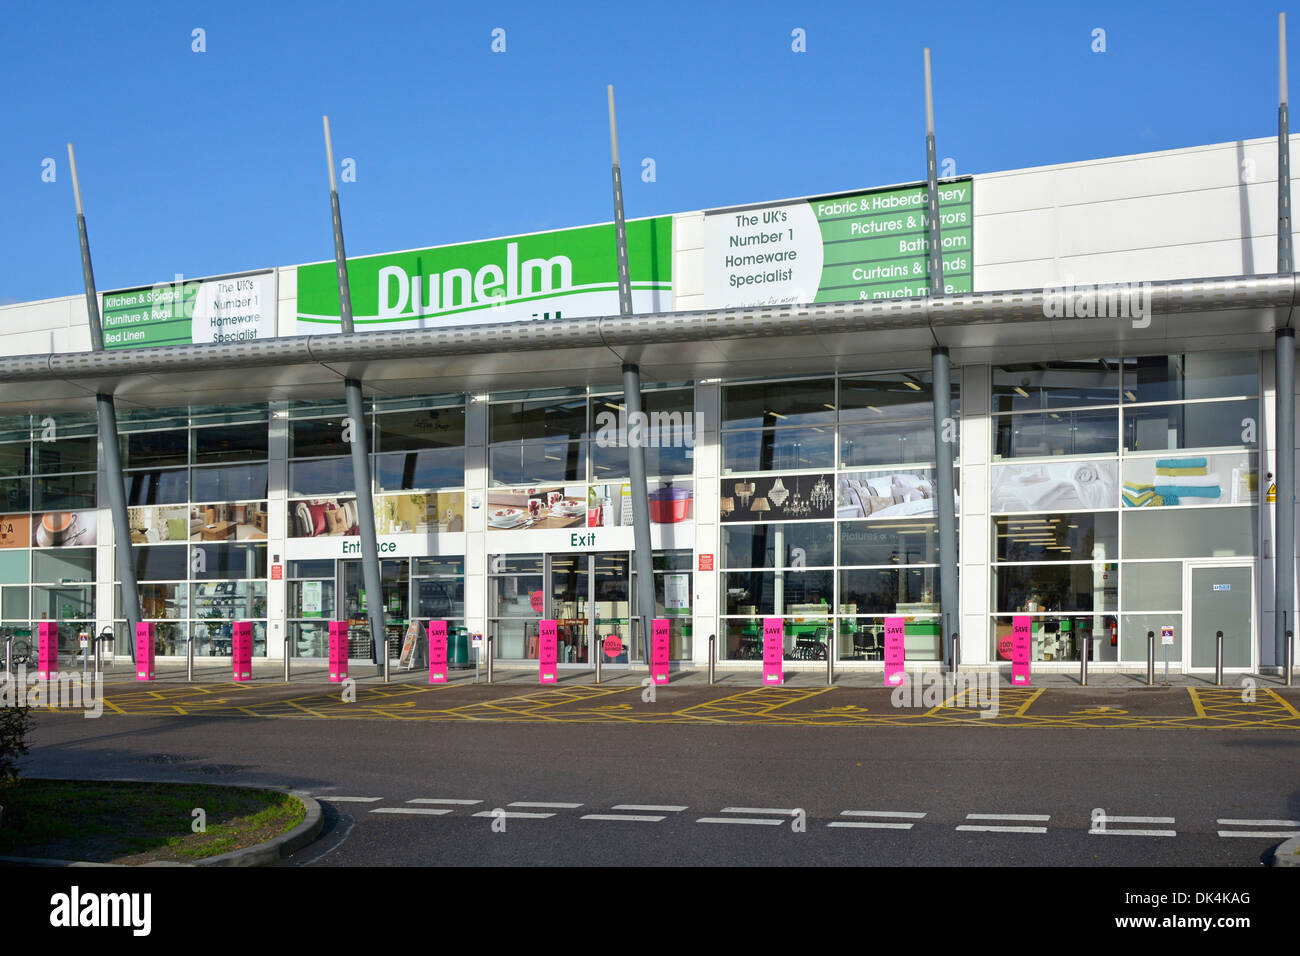 Dunelm homewares & furnishings superstore retail business shop front shoppers free disabled parking Thurrock Shopping Park West Thurrock Essex UK Stock Photo